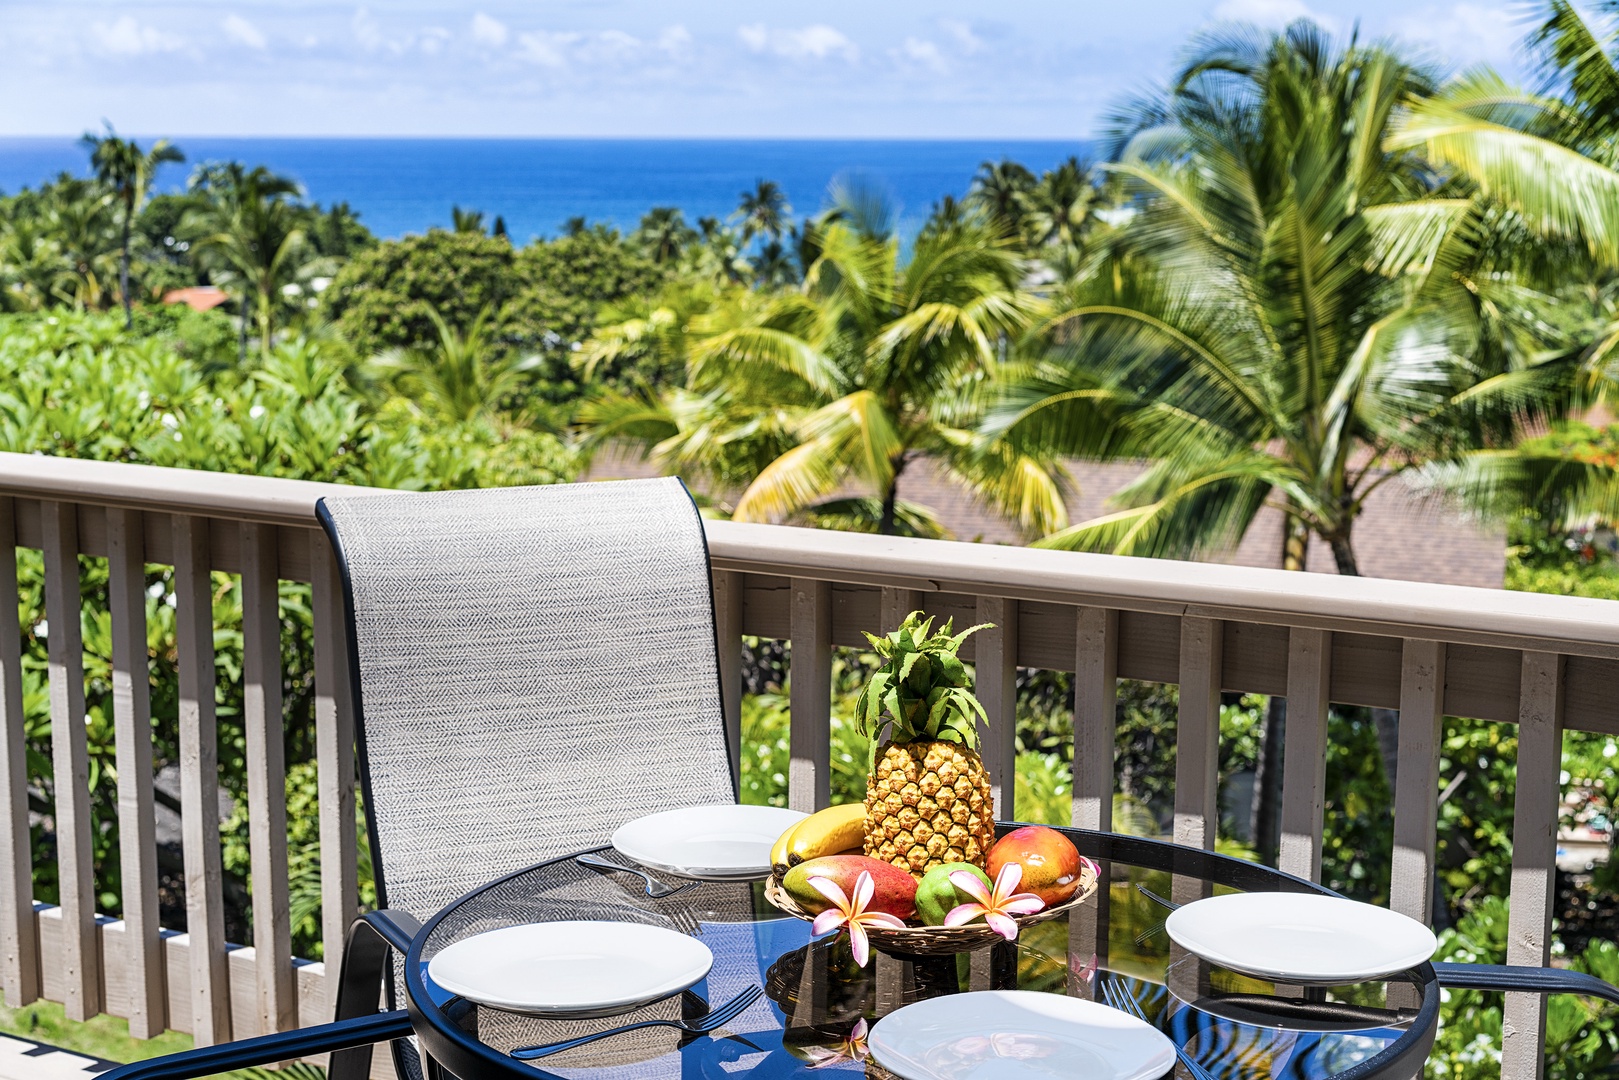 Kailua Kona Vacation Rentals, Keauhou Resort 113 - Nothing better than a wonderful home cooked meal with a view!